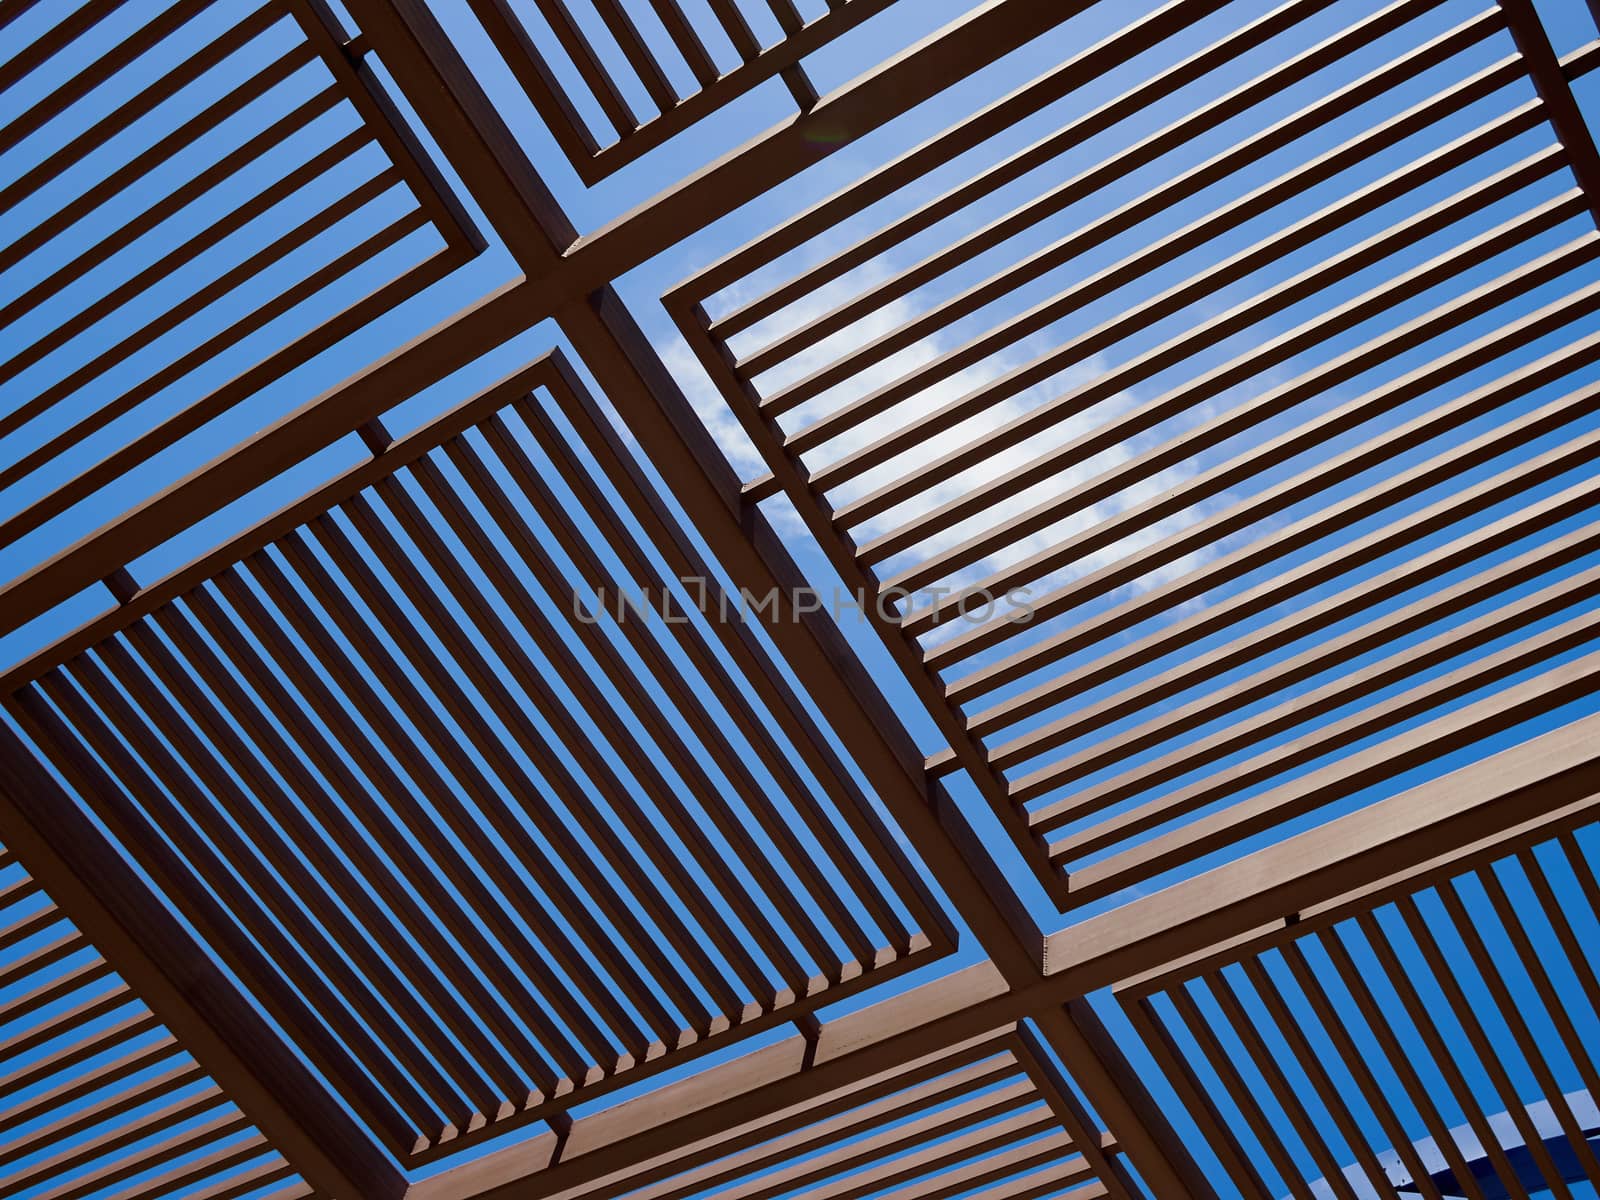 Modern design pergola arbor made wood and metal with clear blue summer sky background